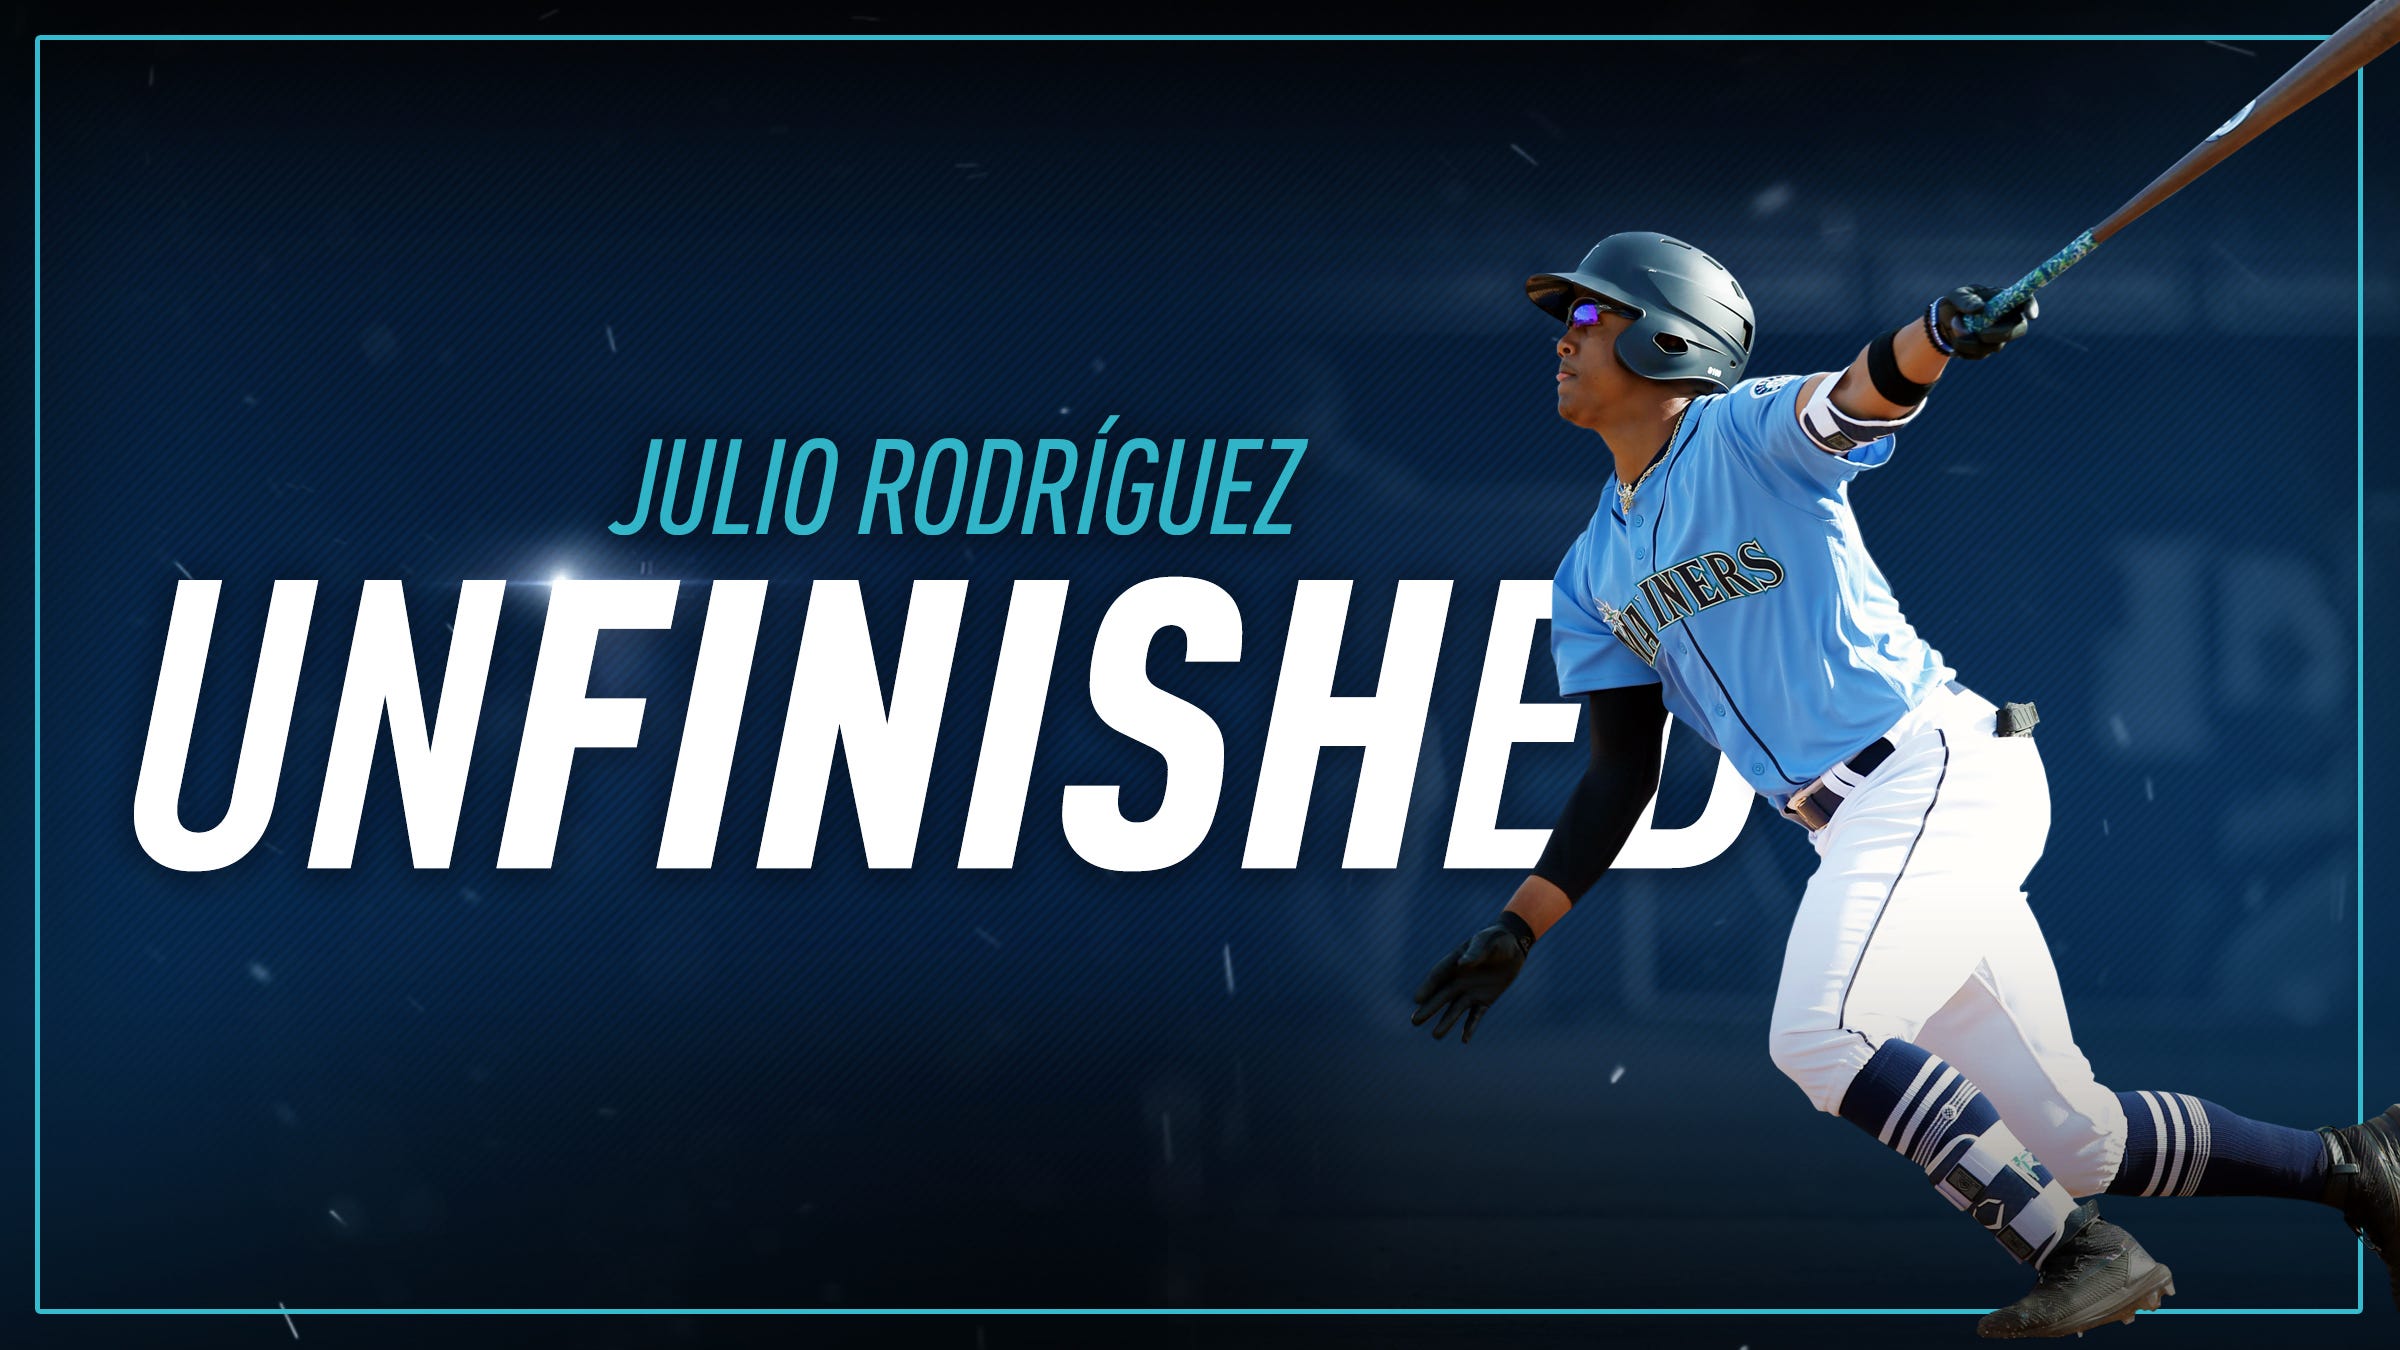 Seattle Mariners star Julio Rodriguez is primed for an MVP run in